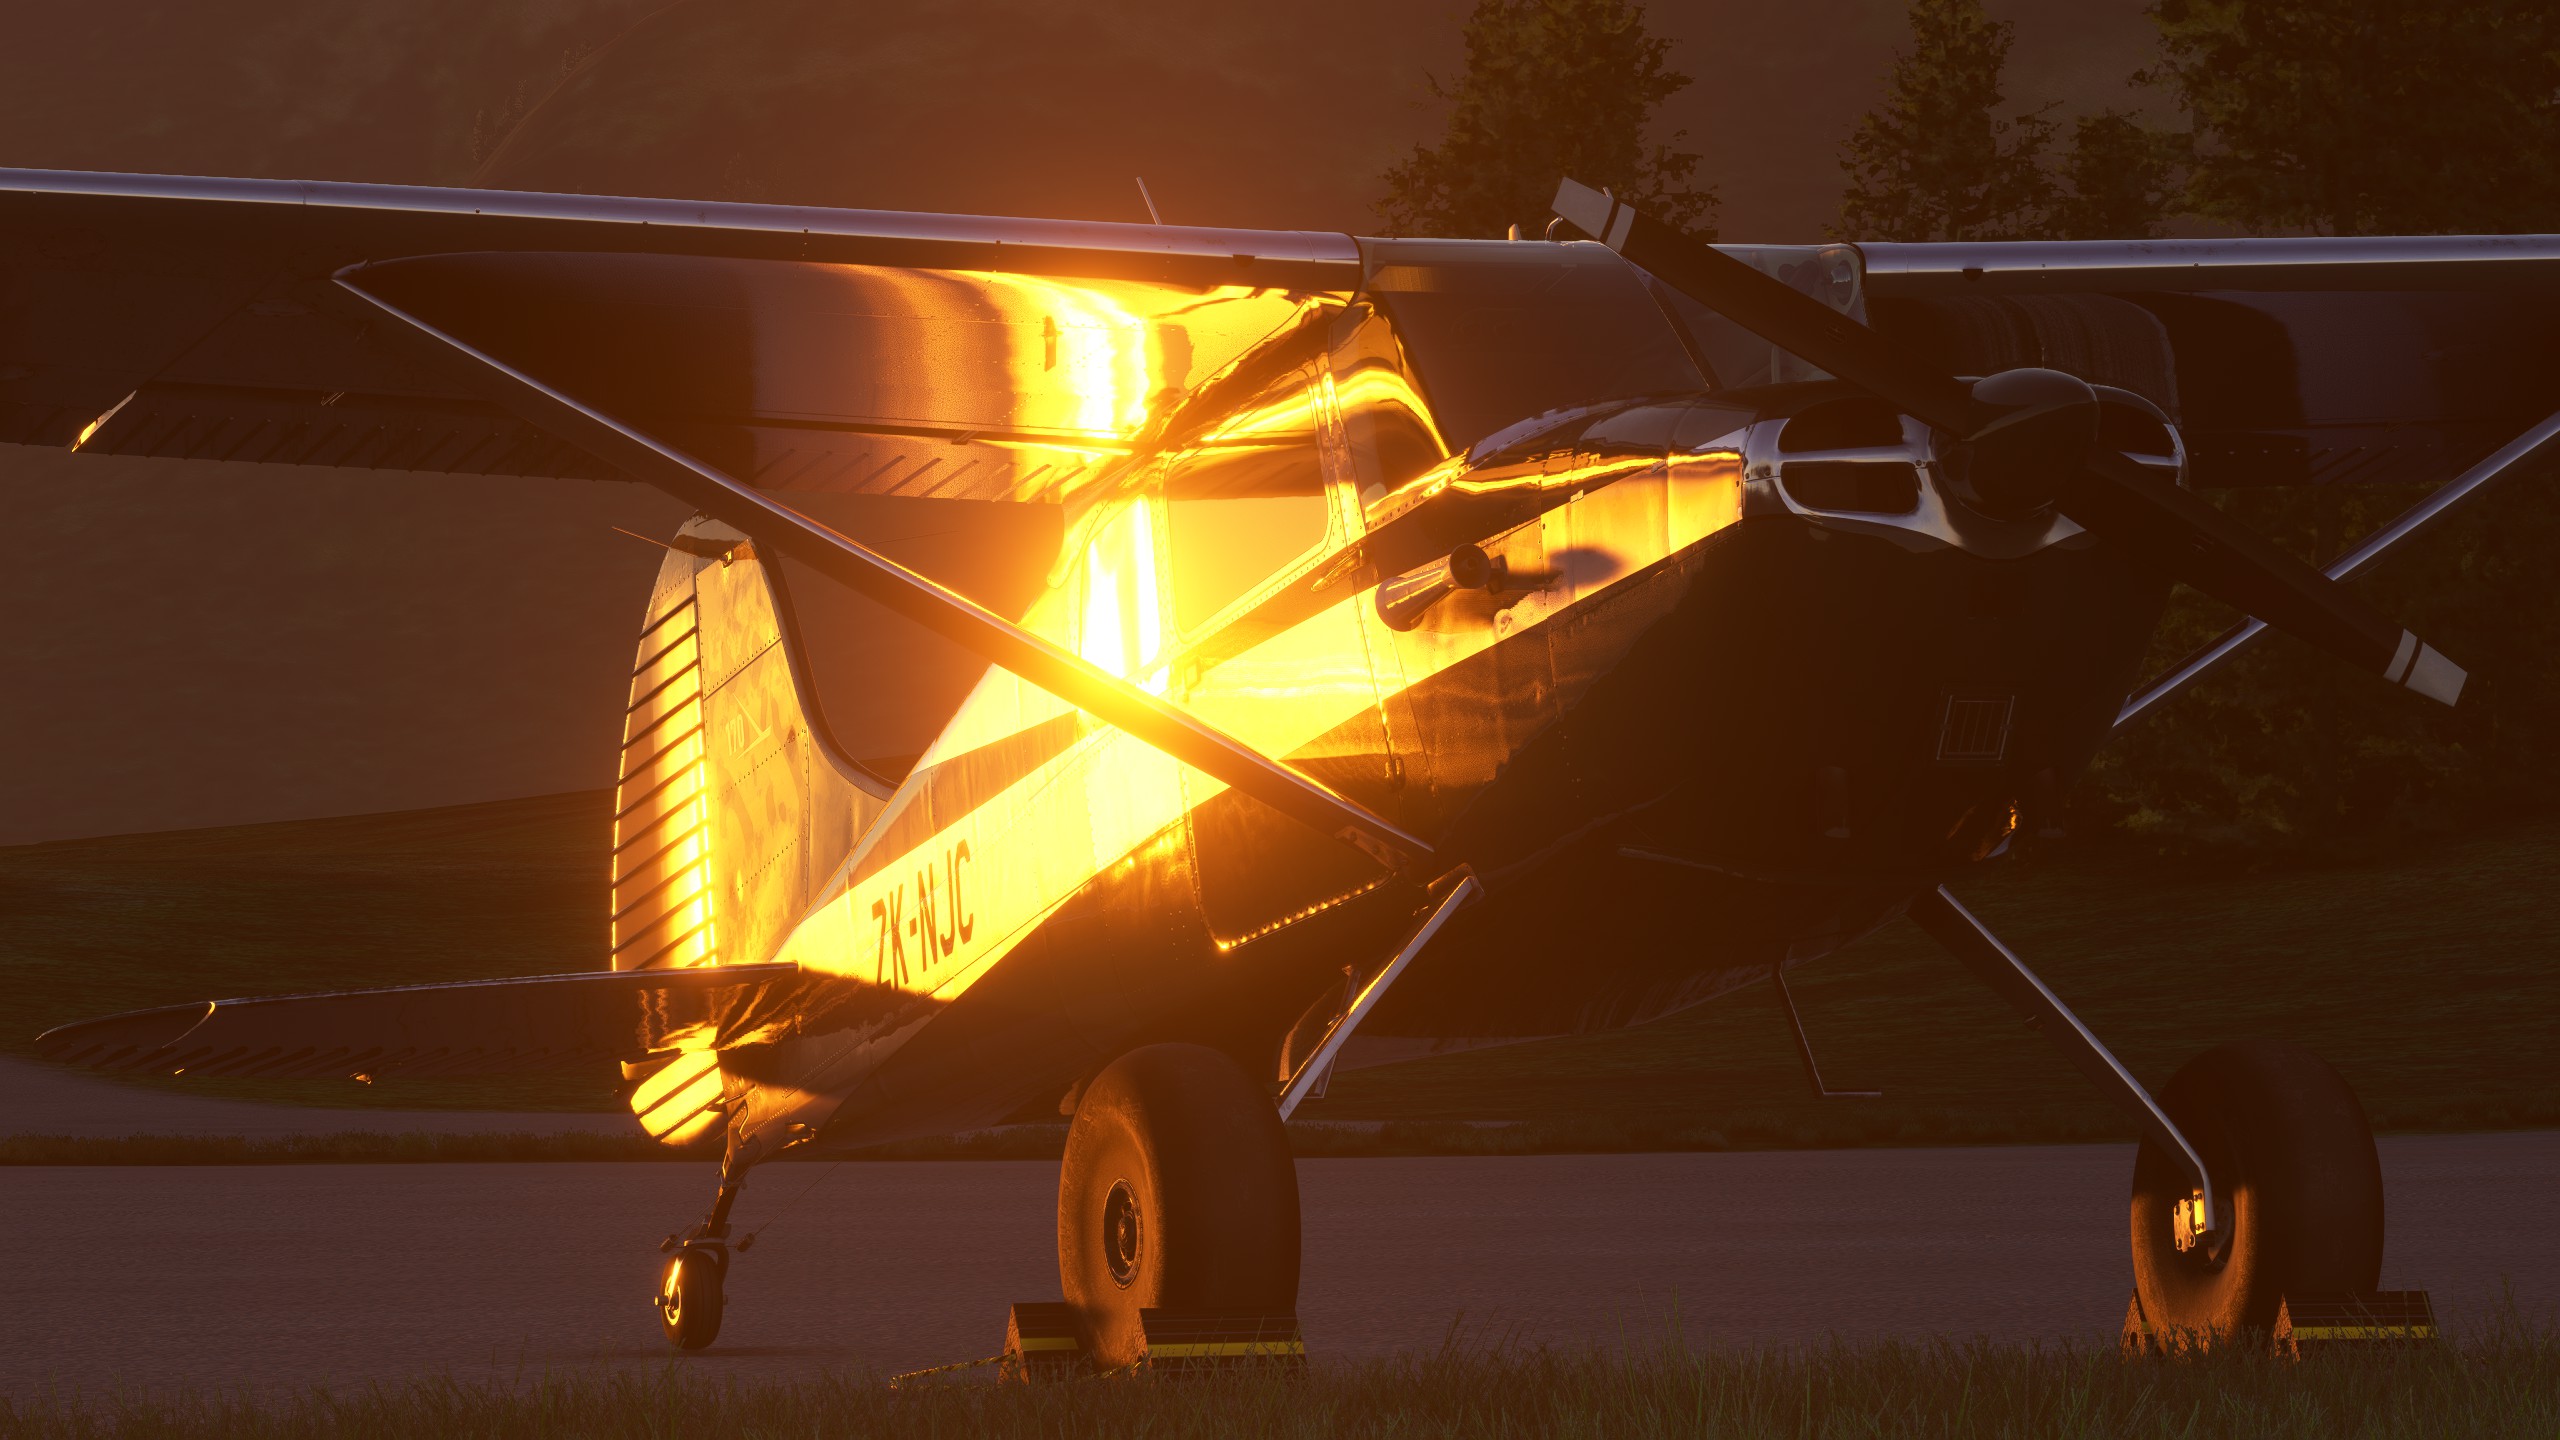 A high wing taildragger GA aircraft is parked on the ground. The sun is reflecting off the side of the plane.